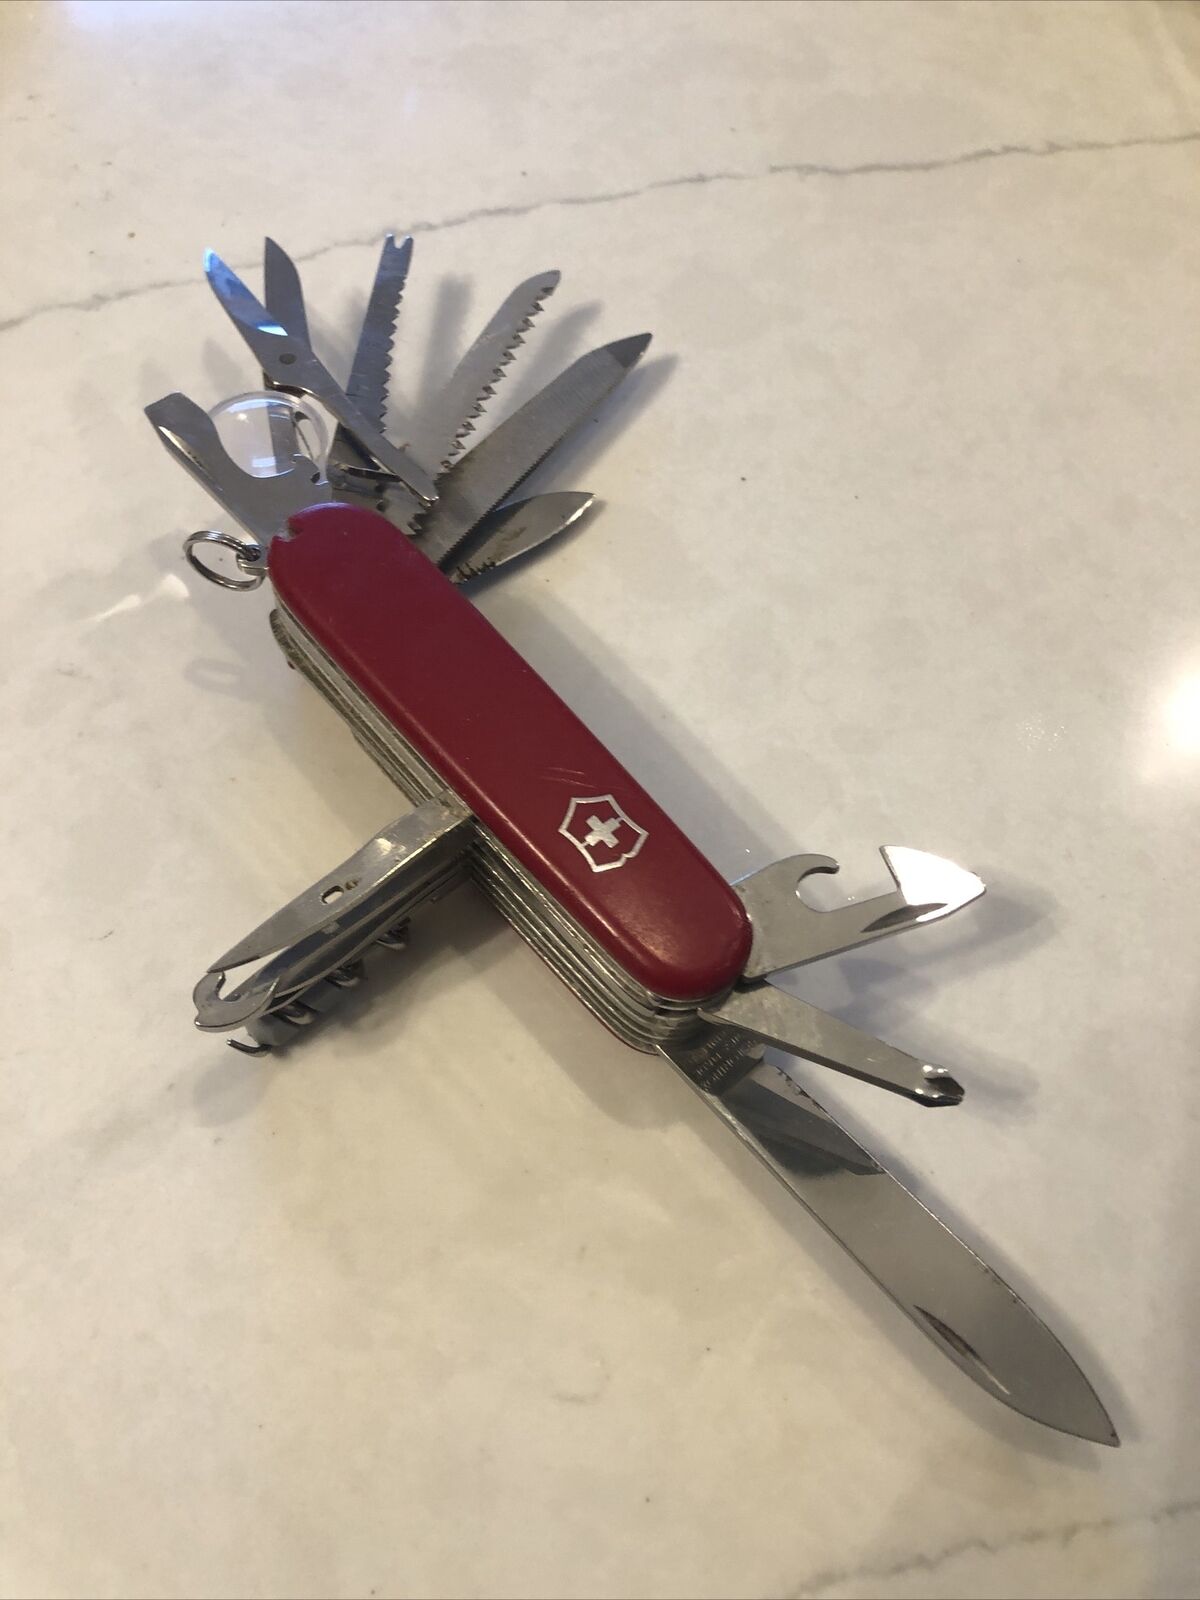 VINTAGE VICTORINOX SWISS ARMY KNIFE  OFFICER SUISSE ROSTFREI